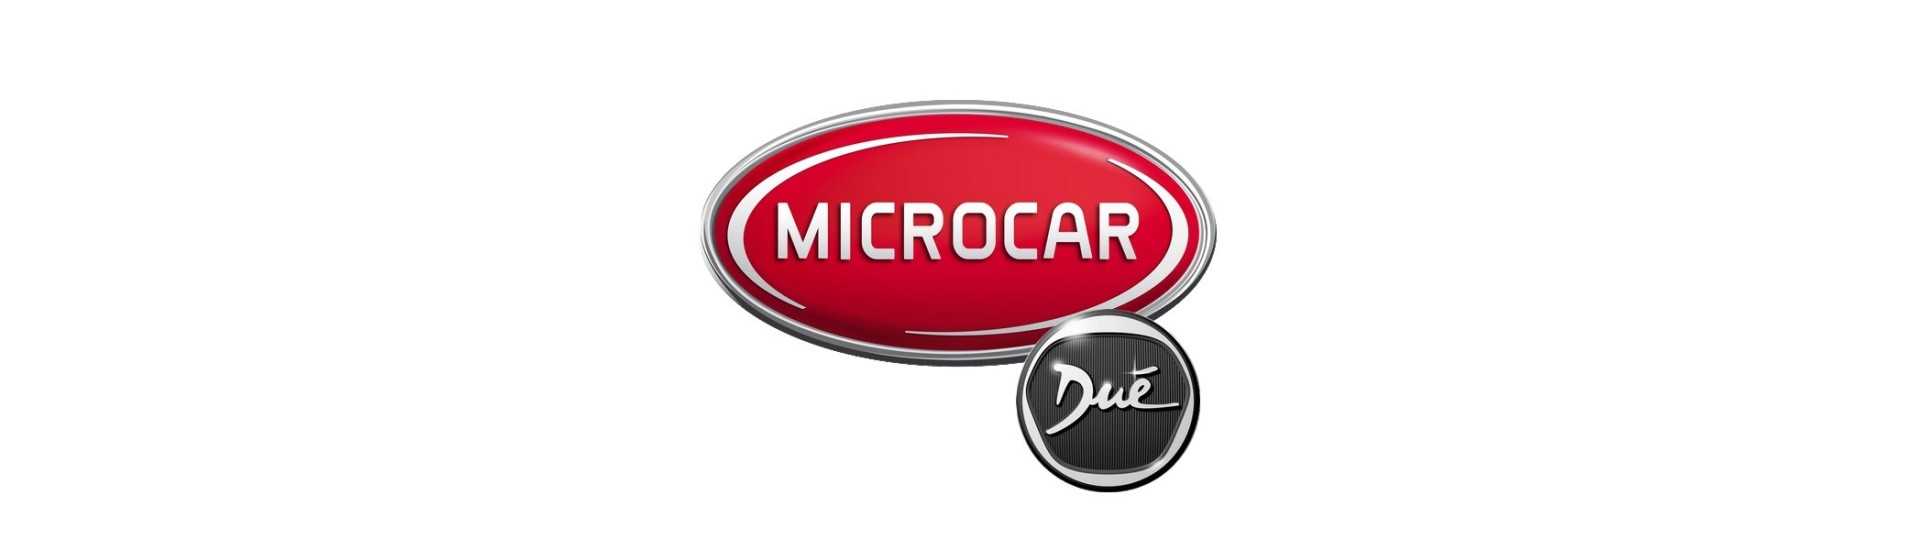 Reversing cable at the best price without a permit Microcar Dué